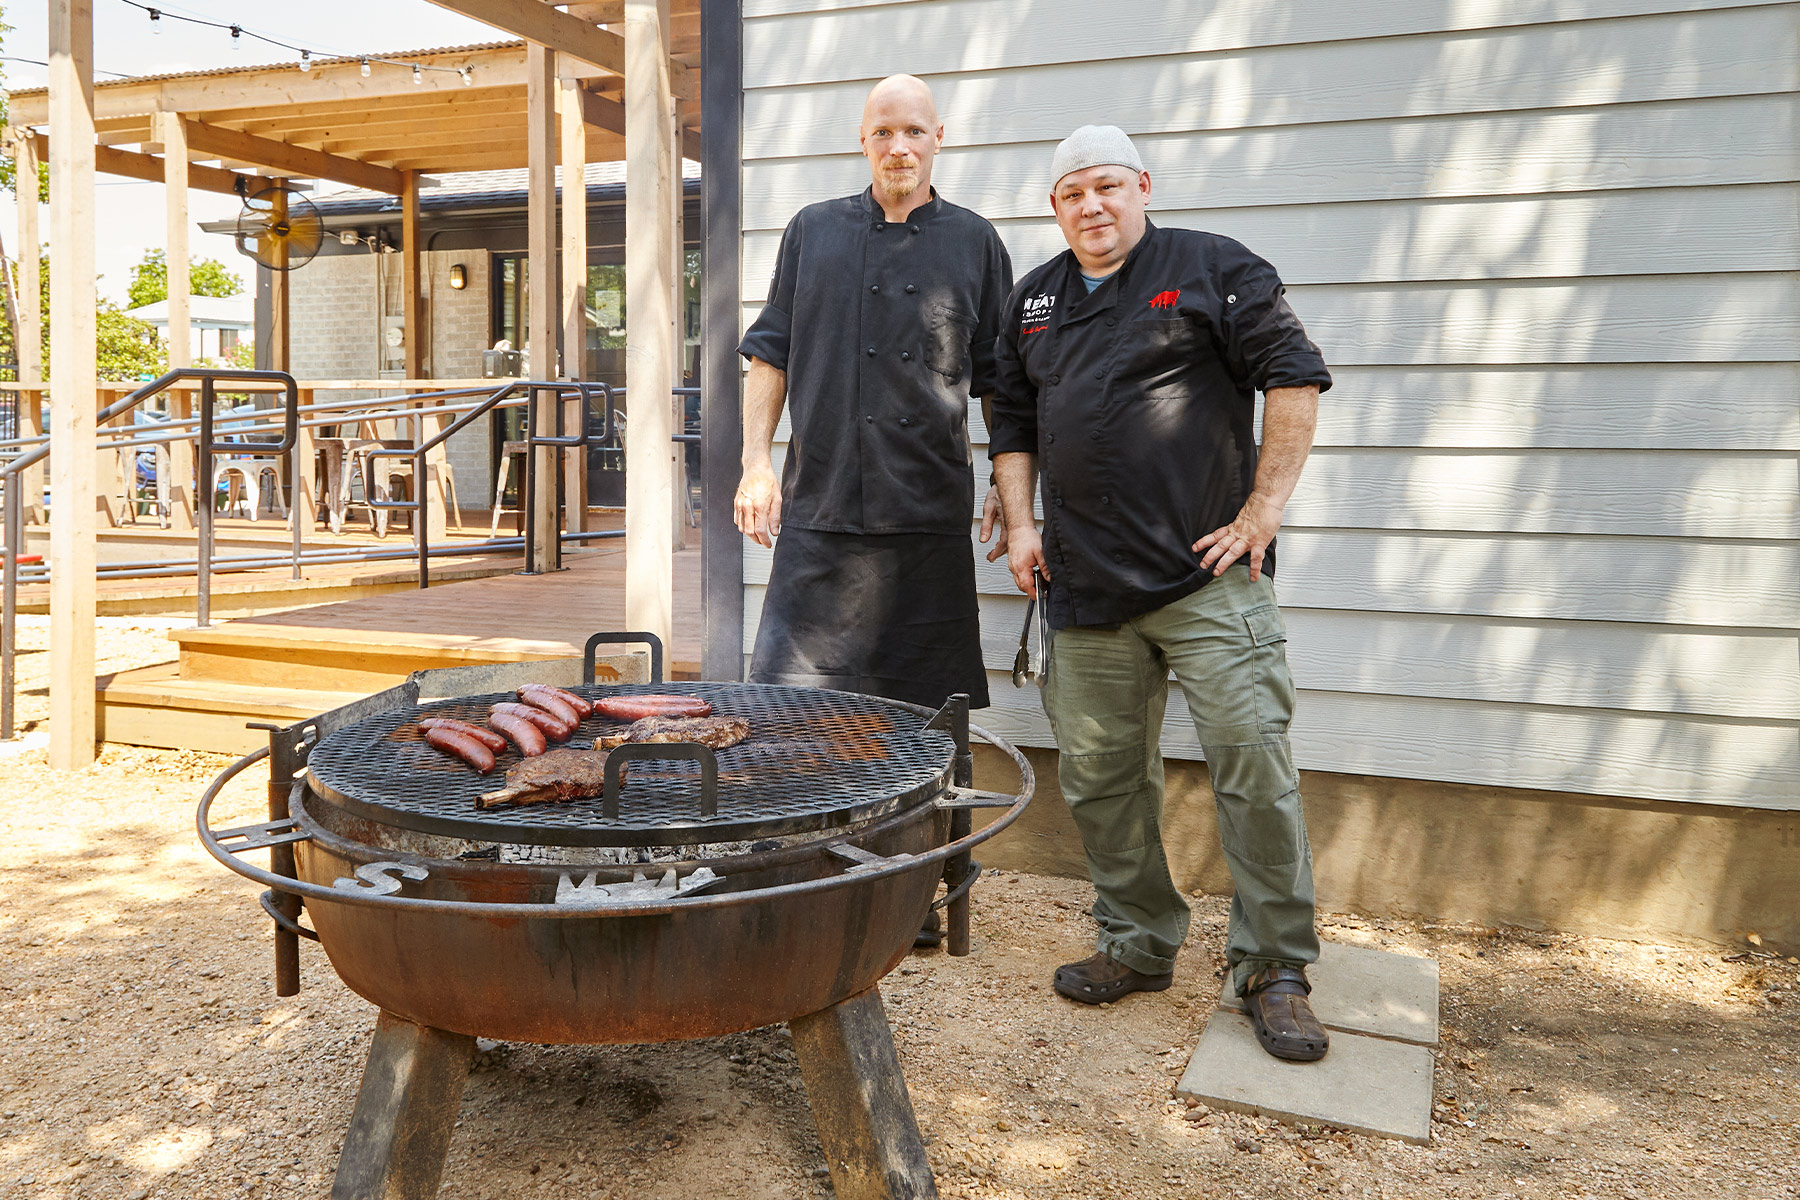 The Meat Shop’s owner, Keith Browning, and his sous chef, Jeff Harper